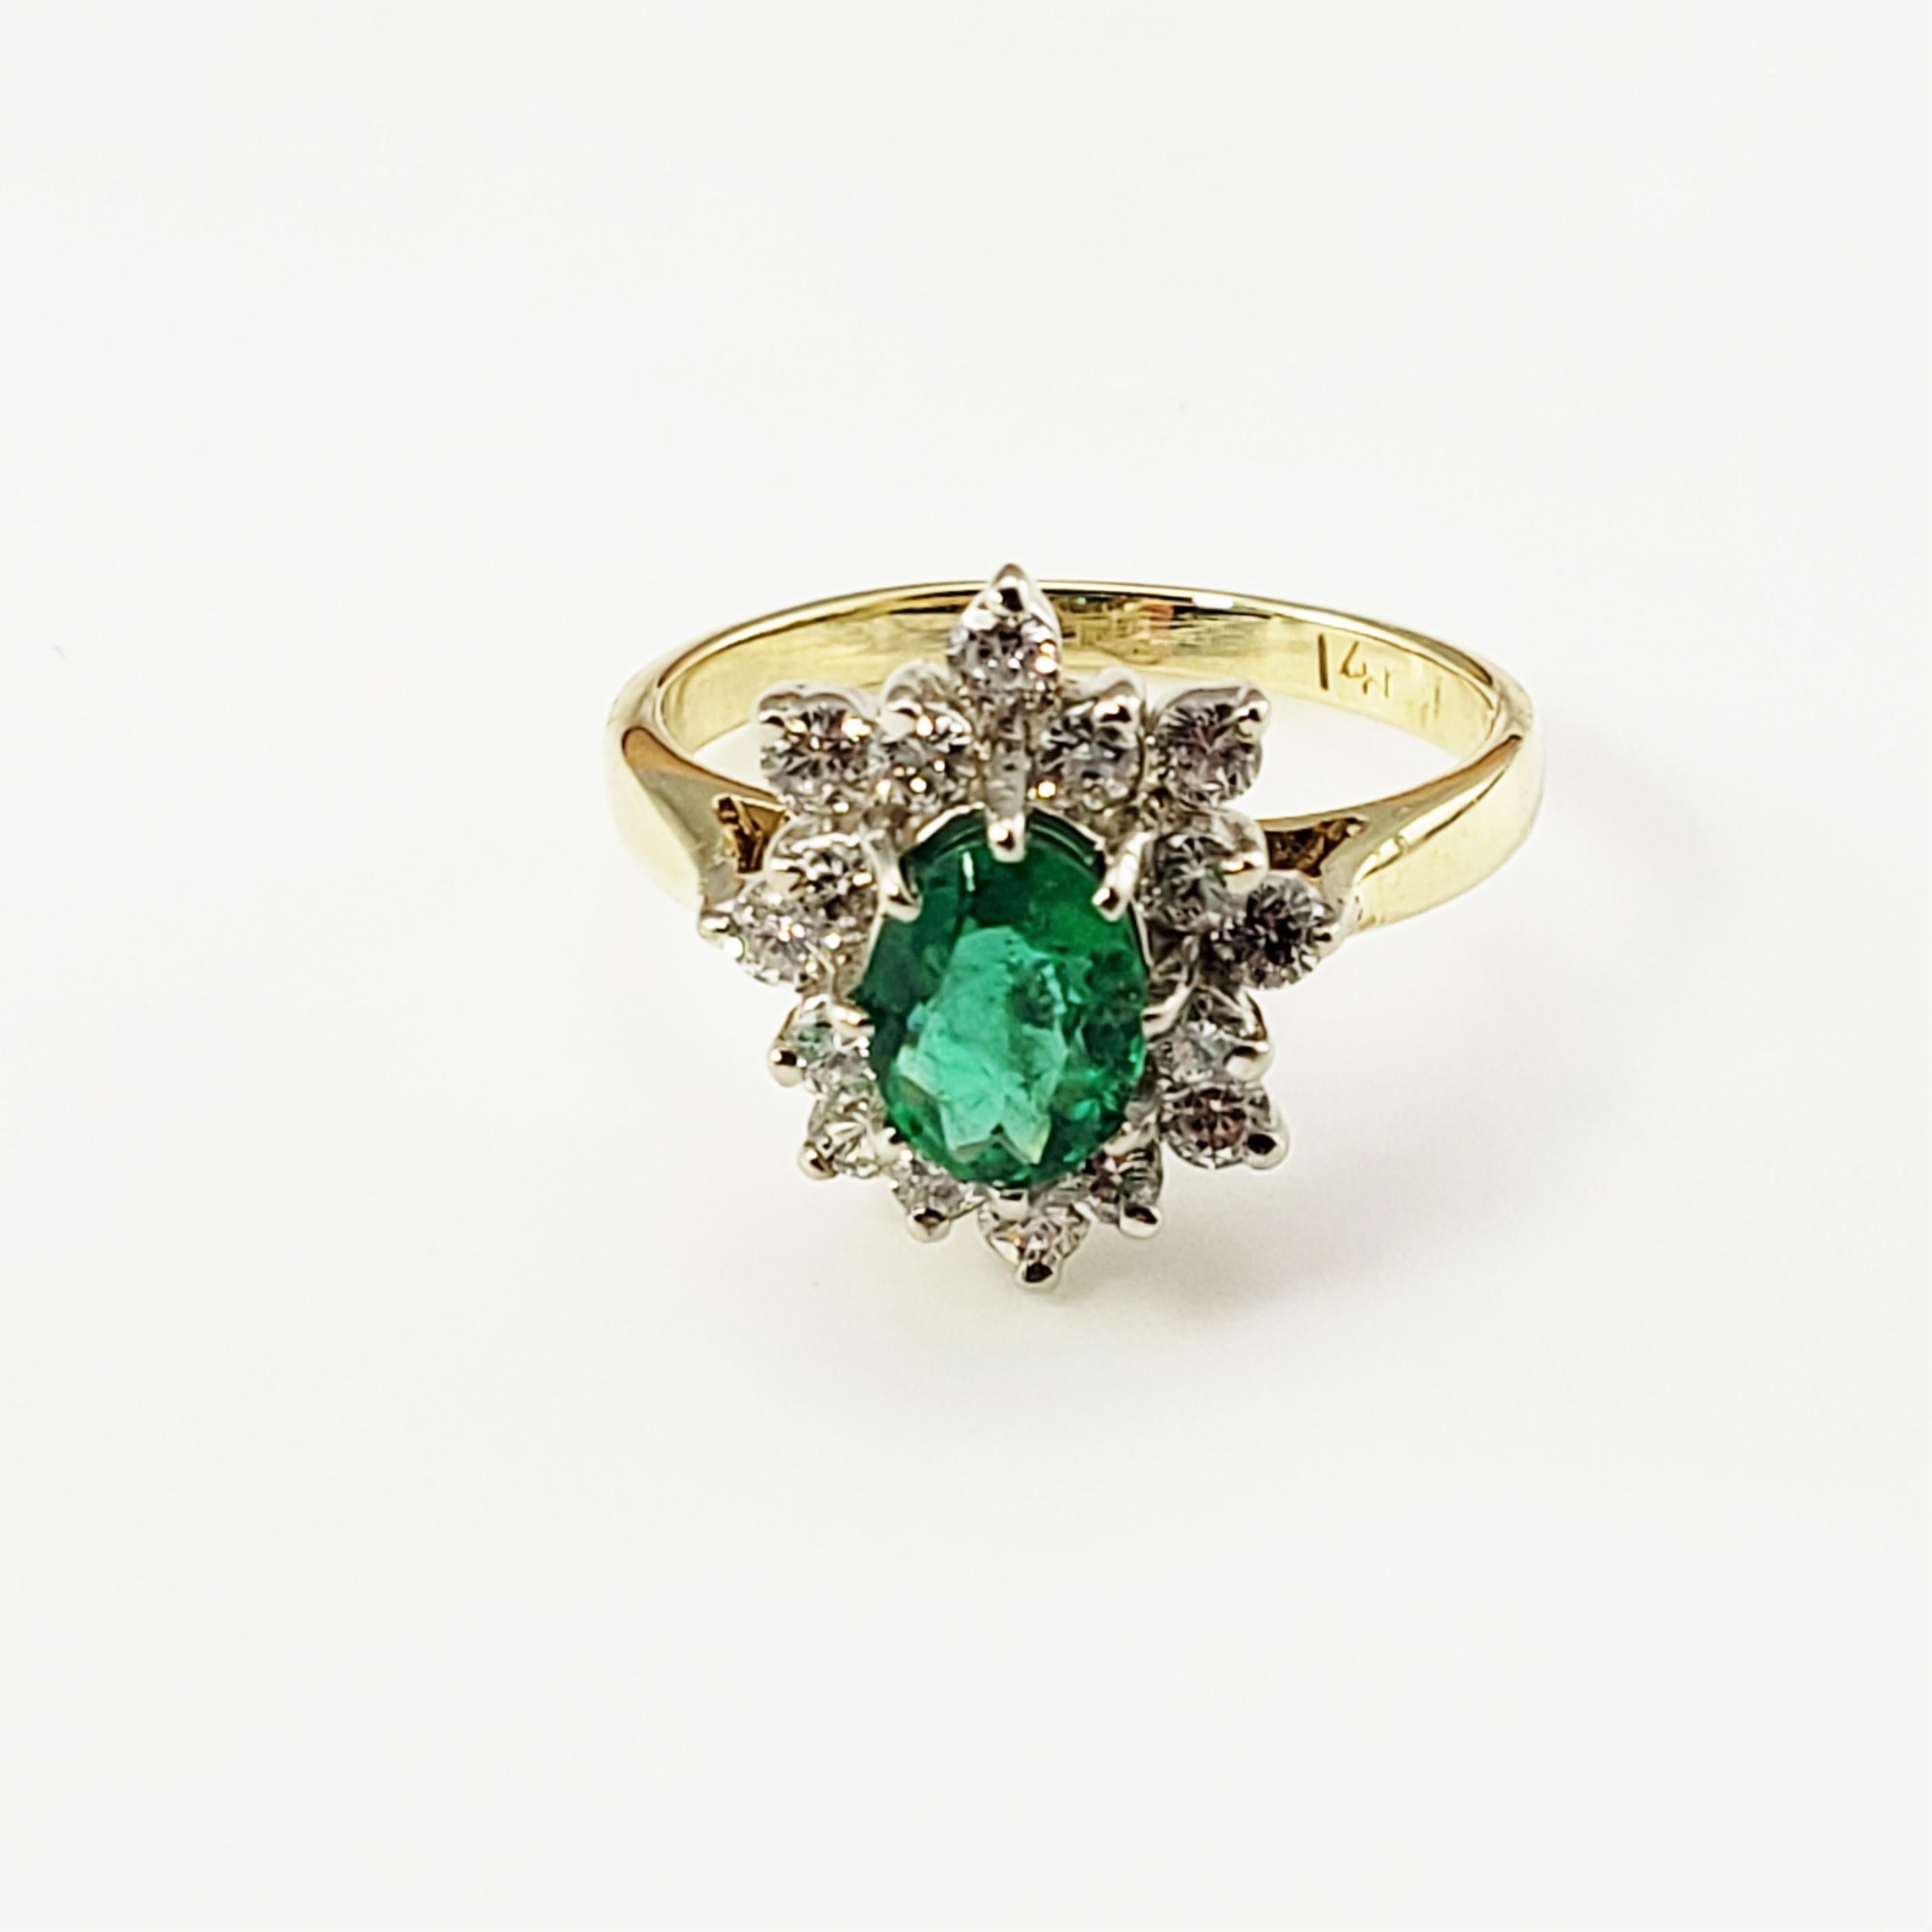 14 Karat Yellow Gold Emerald and Diamond Ring Size 5.75 GAI Certified-

This stunning ring features one oval emerald (7 mm x 5 mm) surrounded by 16 round brilliant cut diamonds set in classic 14K yellow gold.  Shank: 1.5 mm.

Emerald carat weight: 